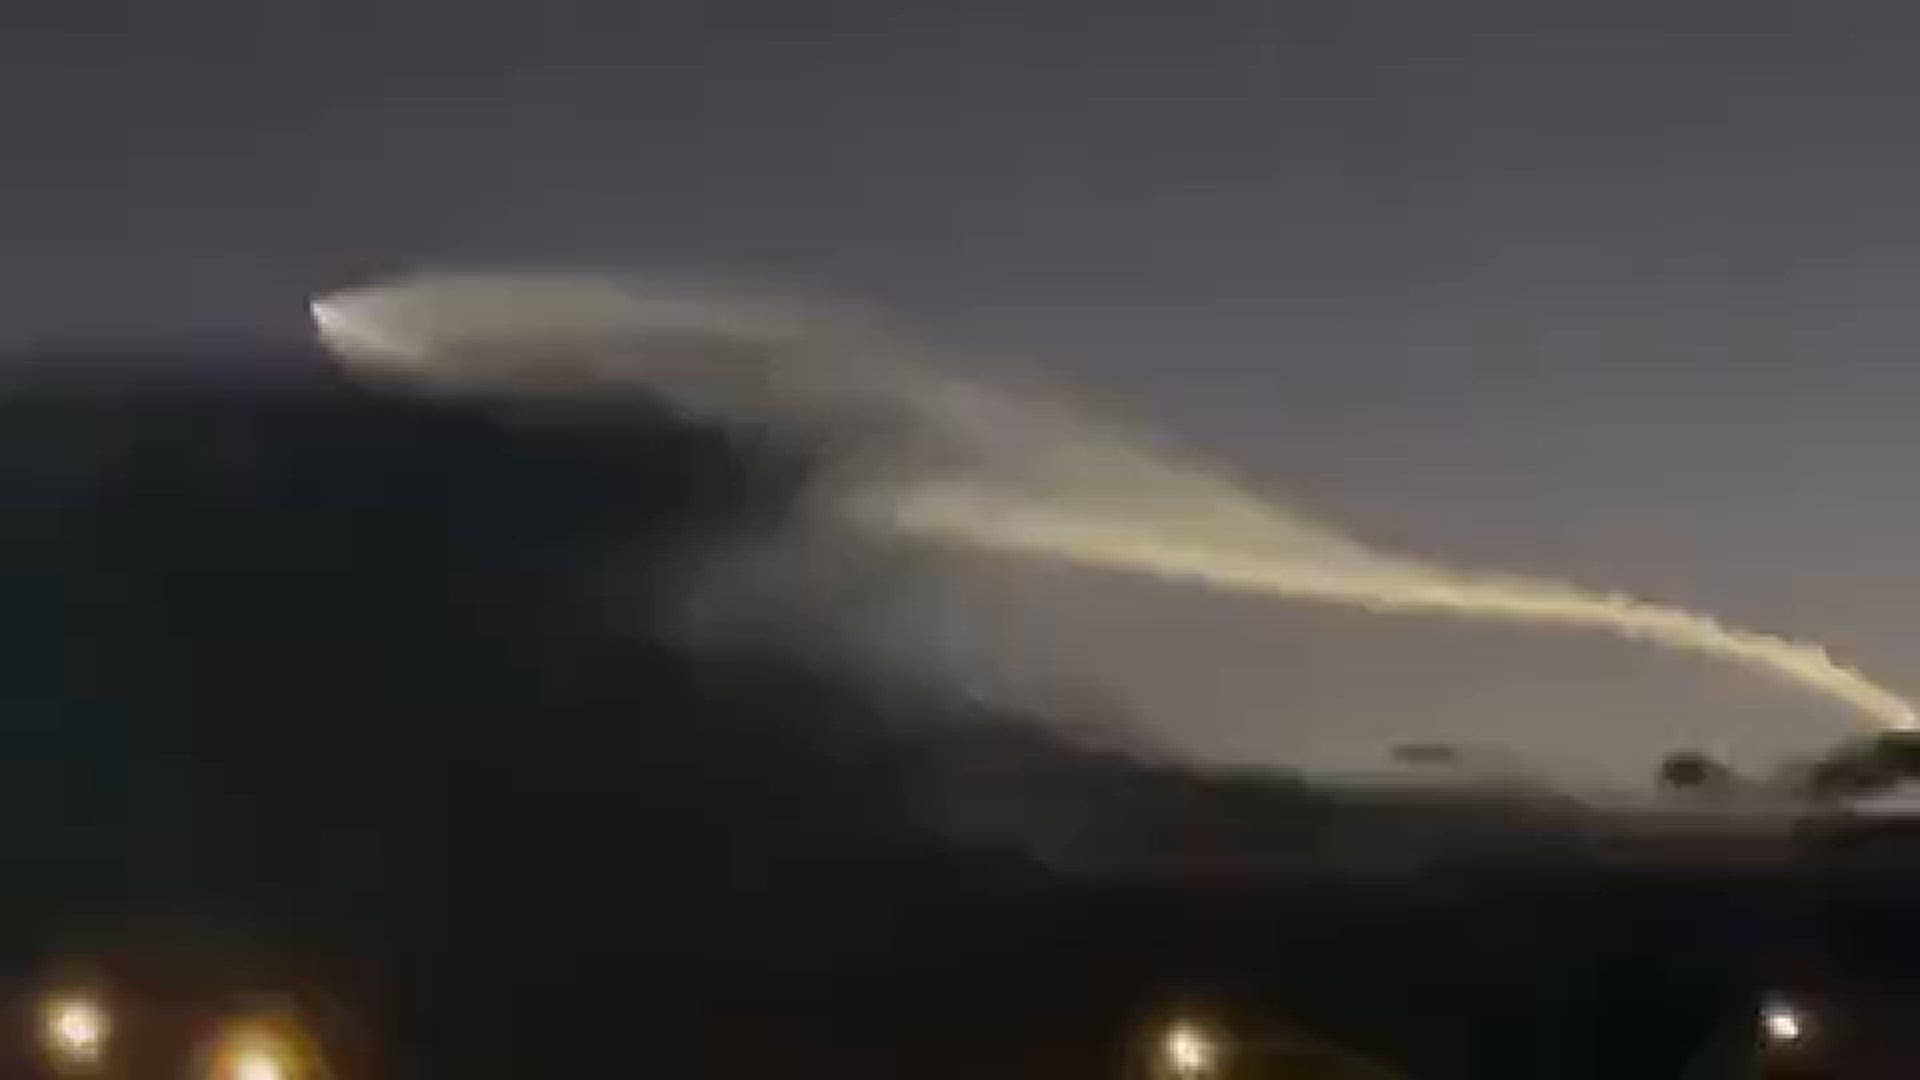 12News viewer Misti in Peoria sent in this video of the SpaceX Falcon 9 rocket launch on April 1, 2024.
Credit: Misti